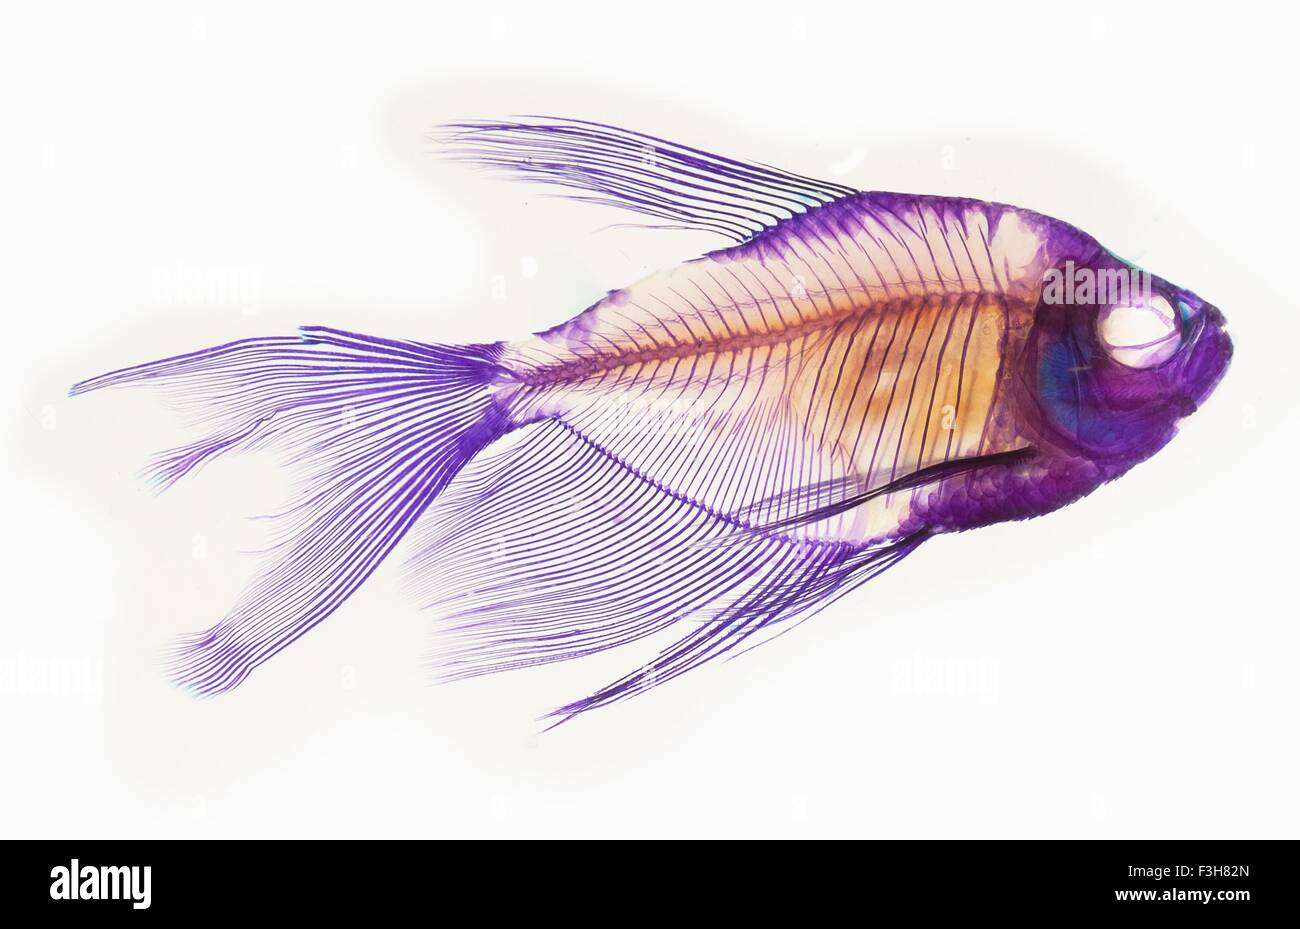 Alizarin staining technique to show the skeletal structure of a black skirt tetra fish Stock Photo